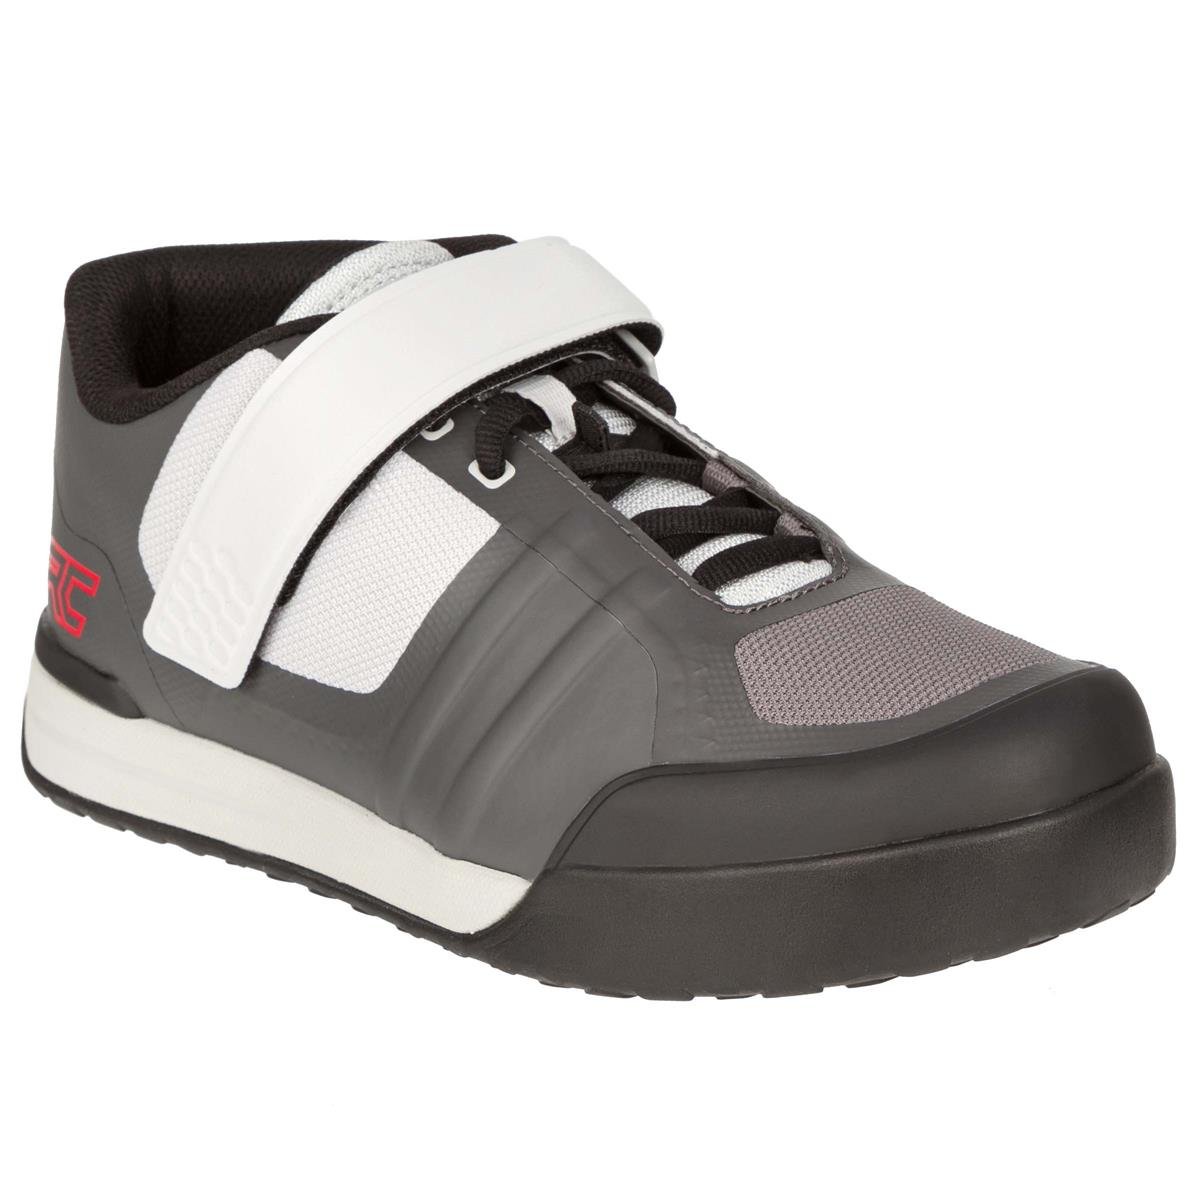 Ride Concepts Bike Shoes Transition Charcoal/Red